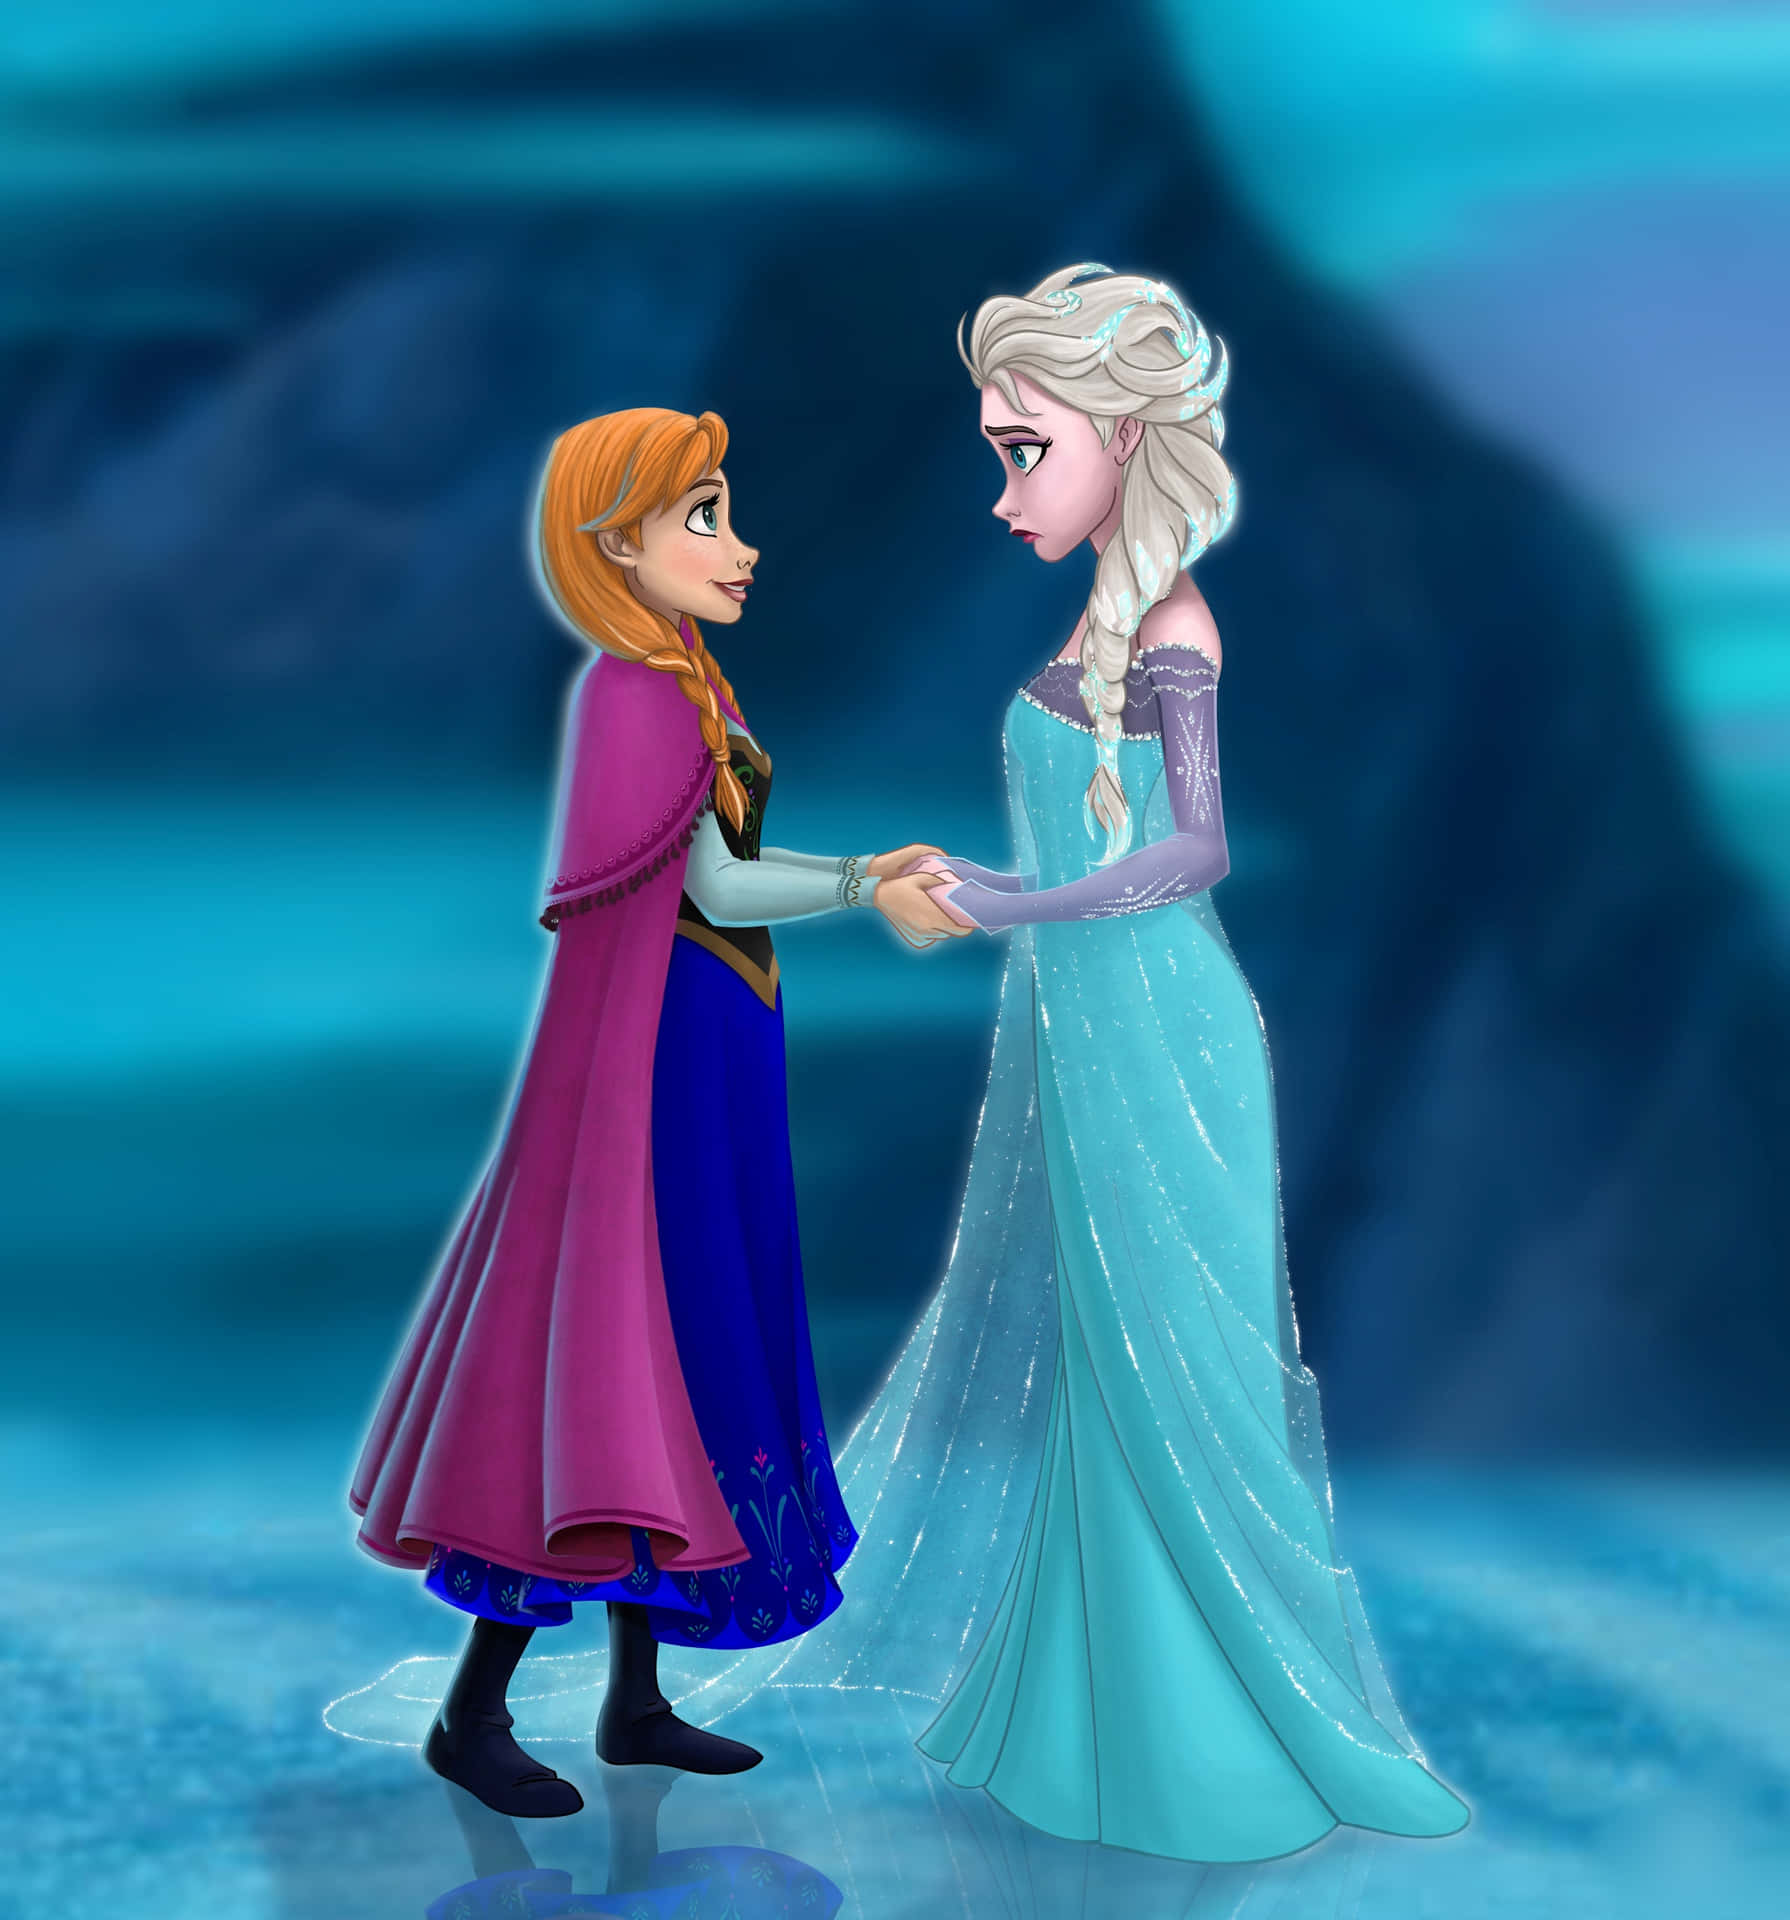 Sisters Forever - Elsa And Anna From “Frozen 2”